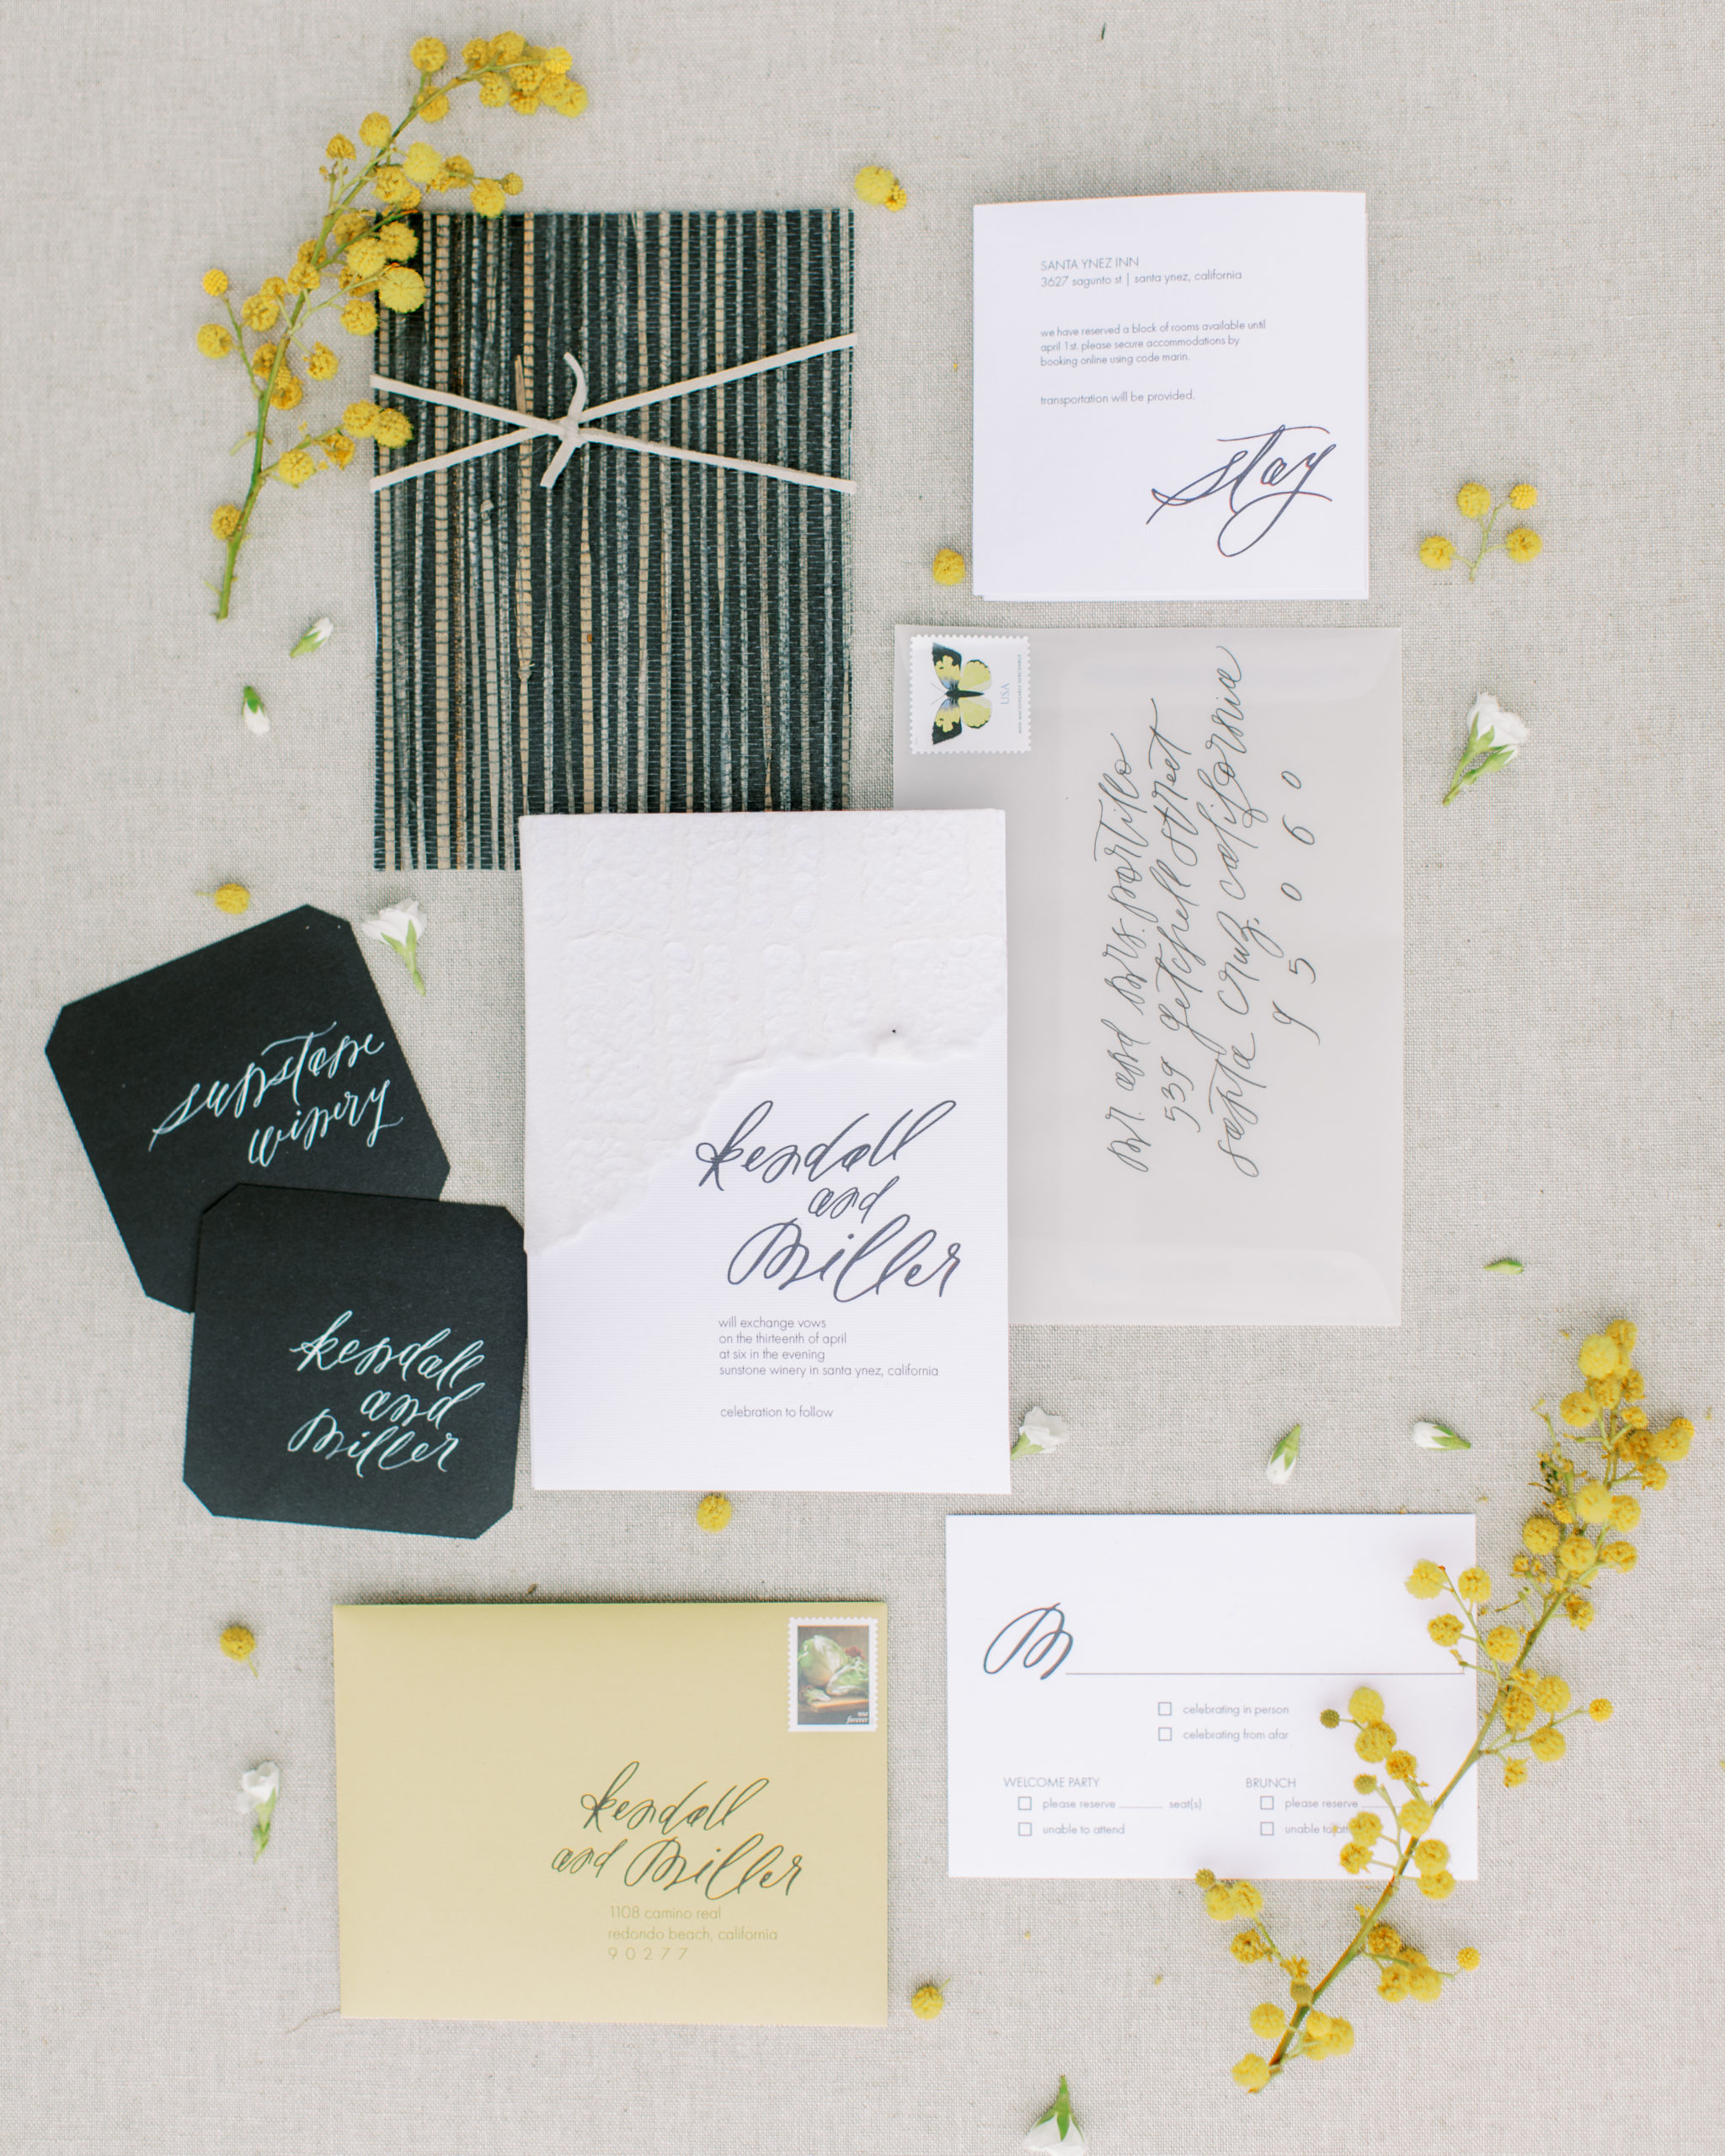 Luxury wedding invitation suite with yellow and white flowers